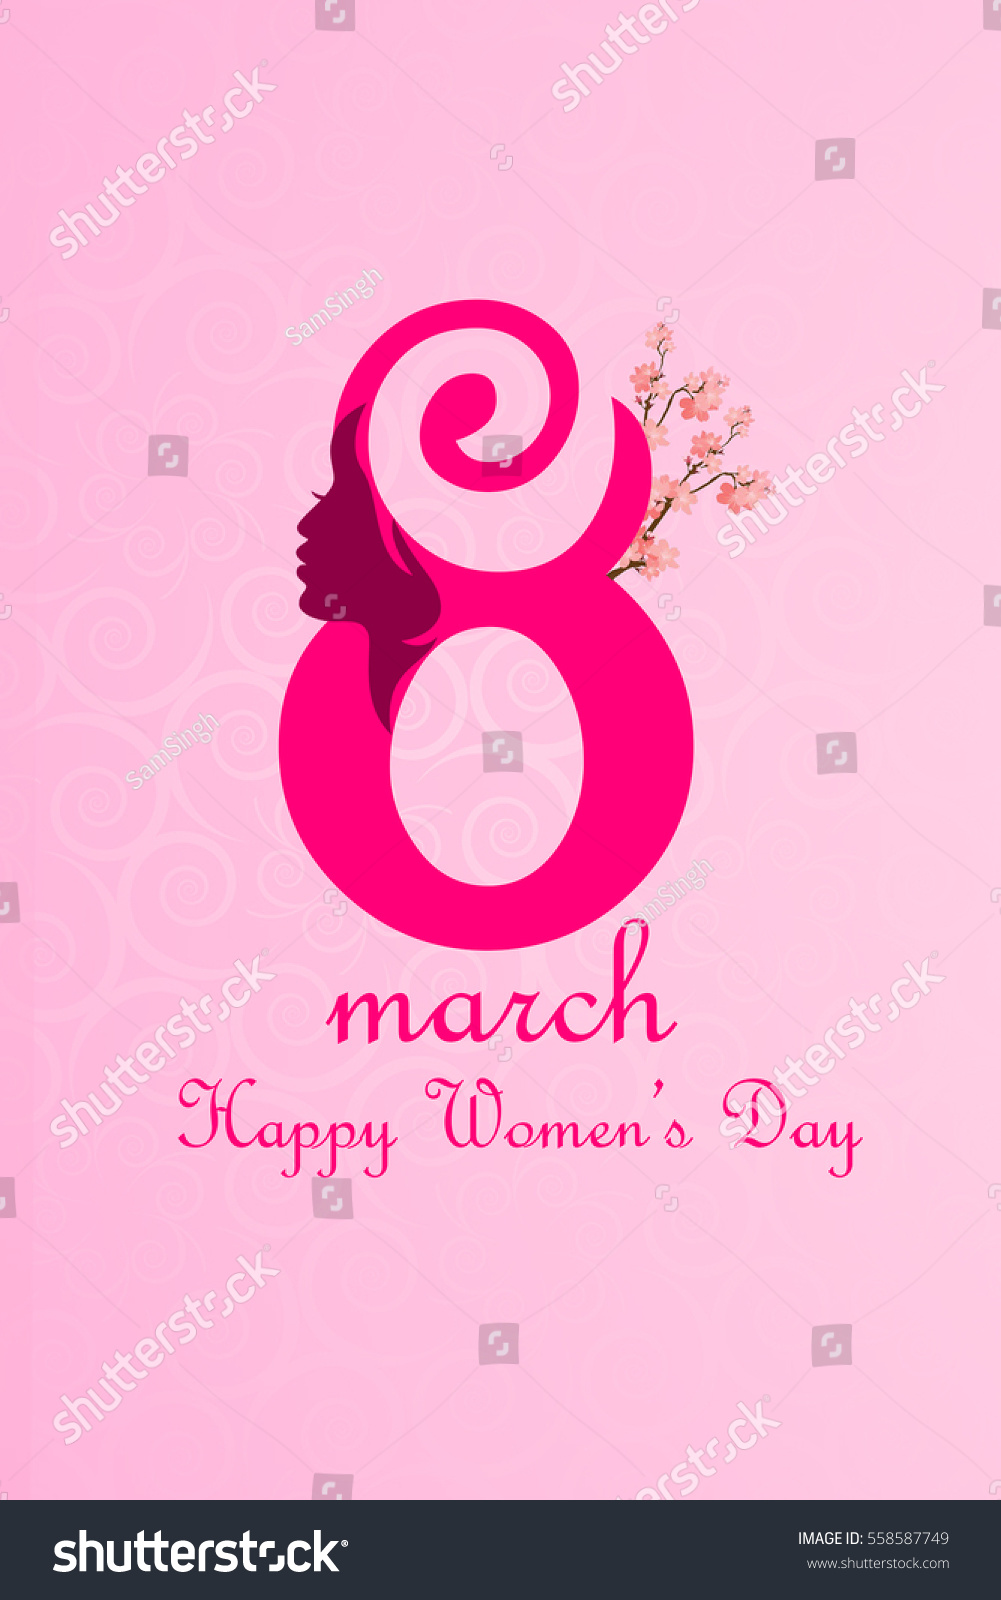 women's day  greetings with pink face on pink background #558587749